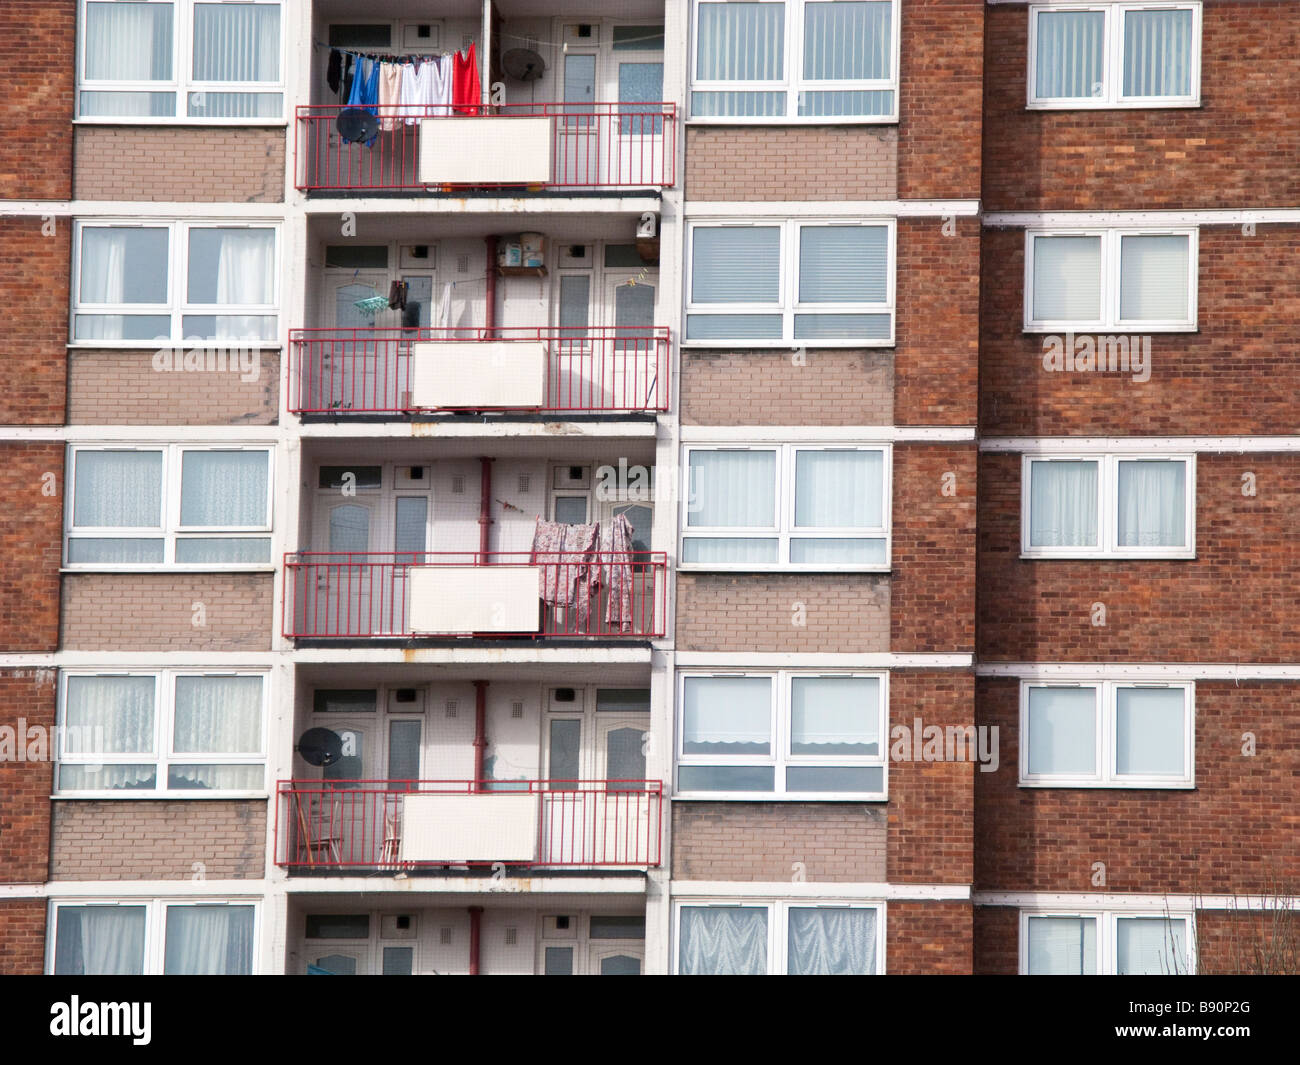 high rise tower blocks on an inner city estate in Liverpool Stock Photo